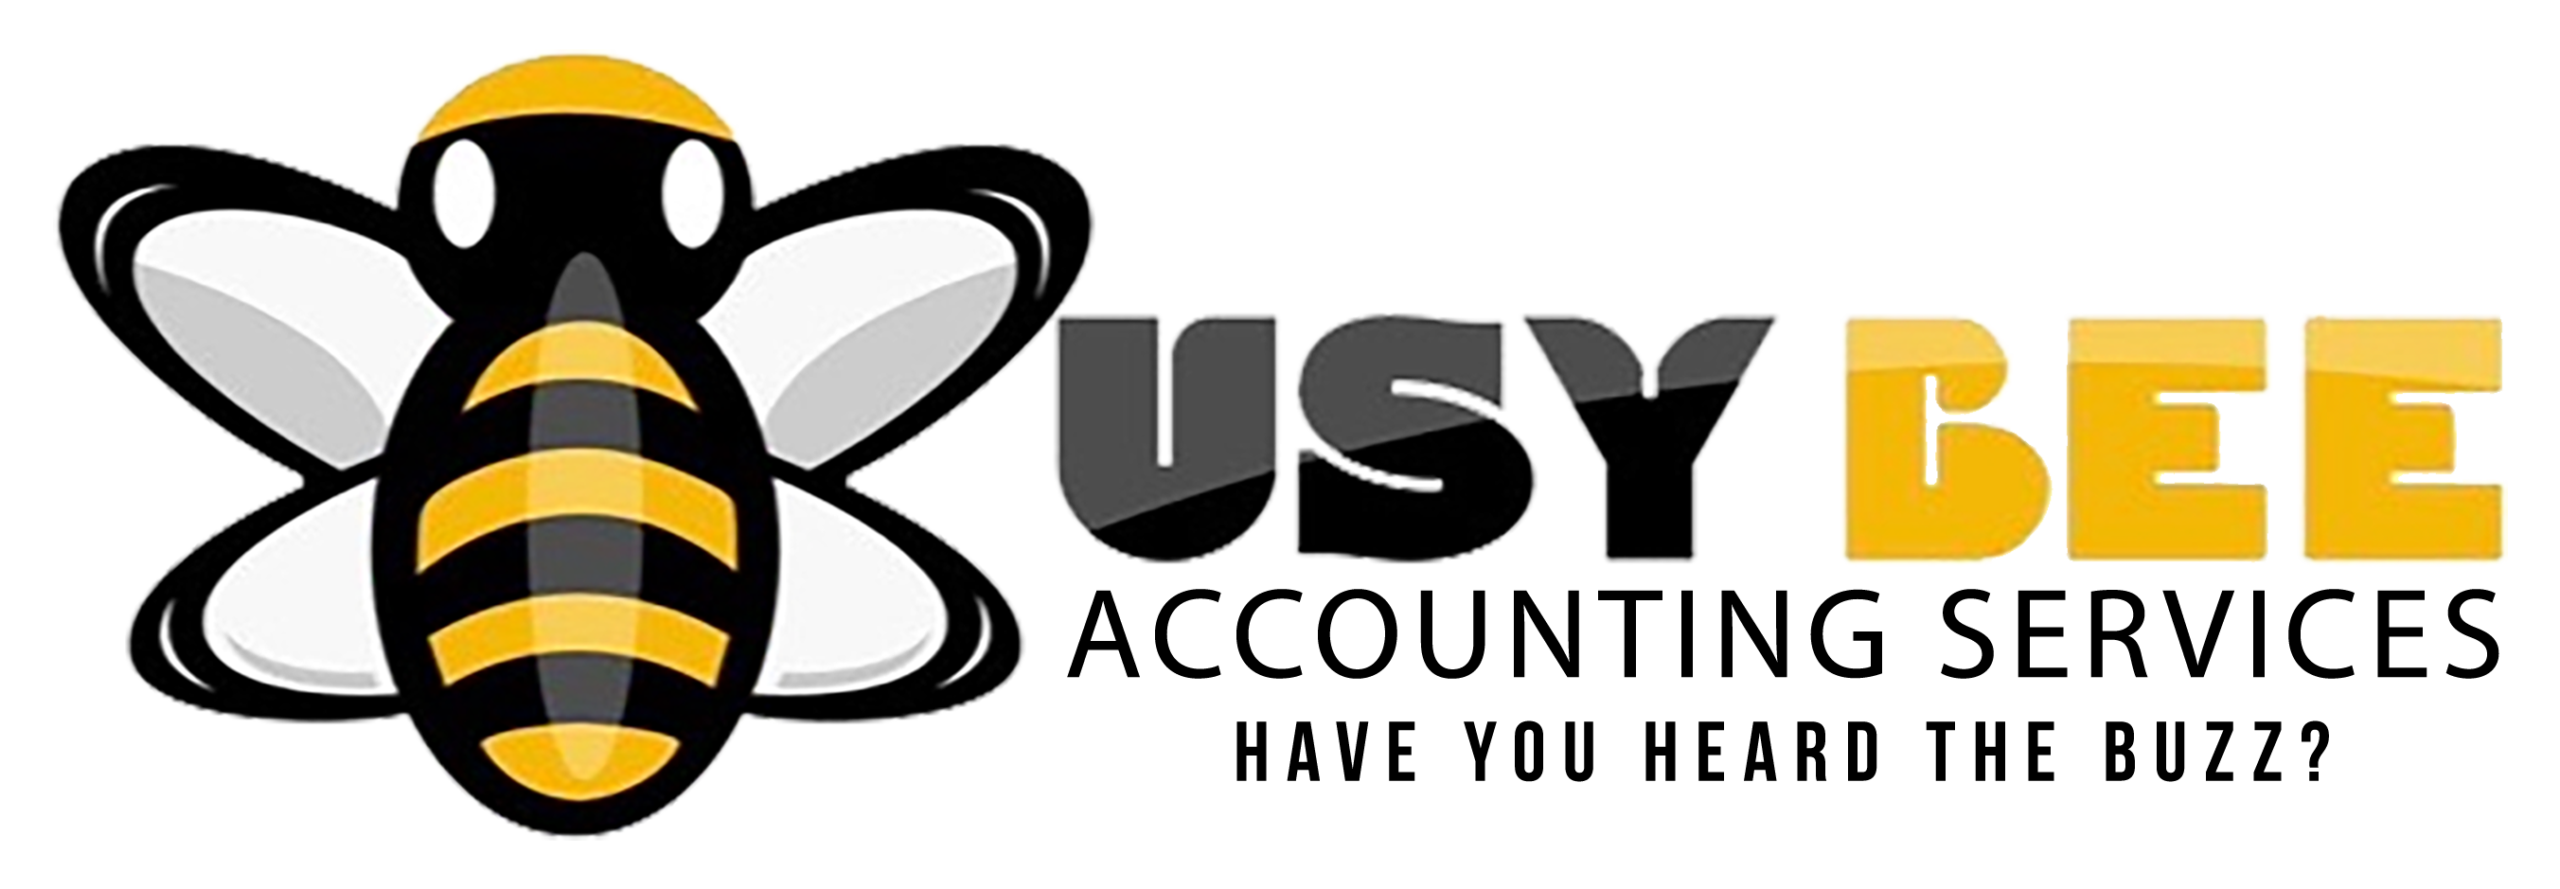 Busy Bee Accounting Services, LLC